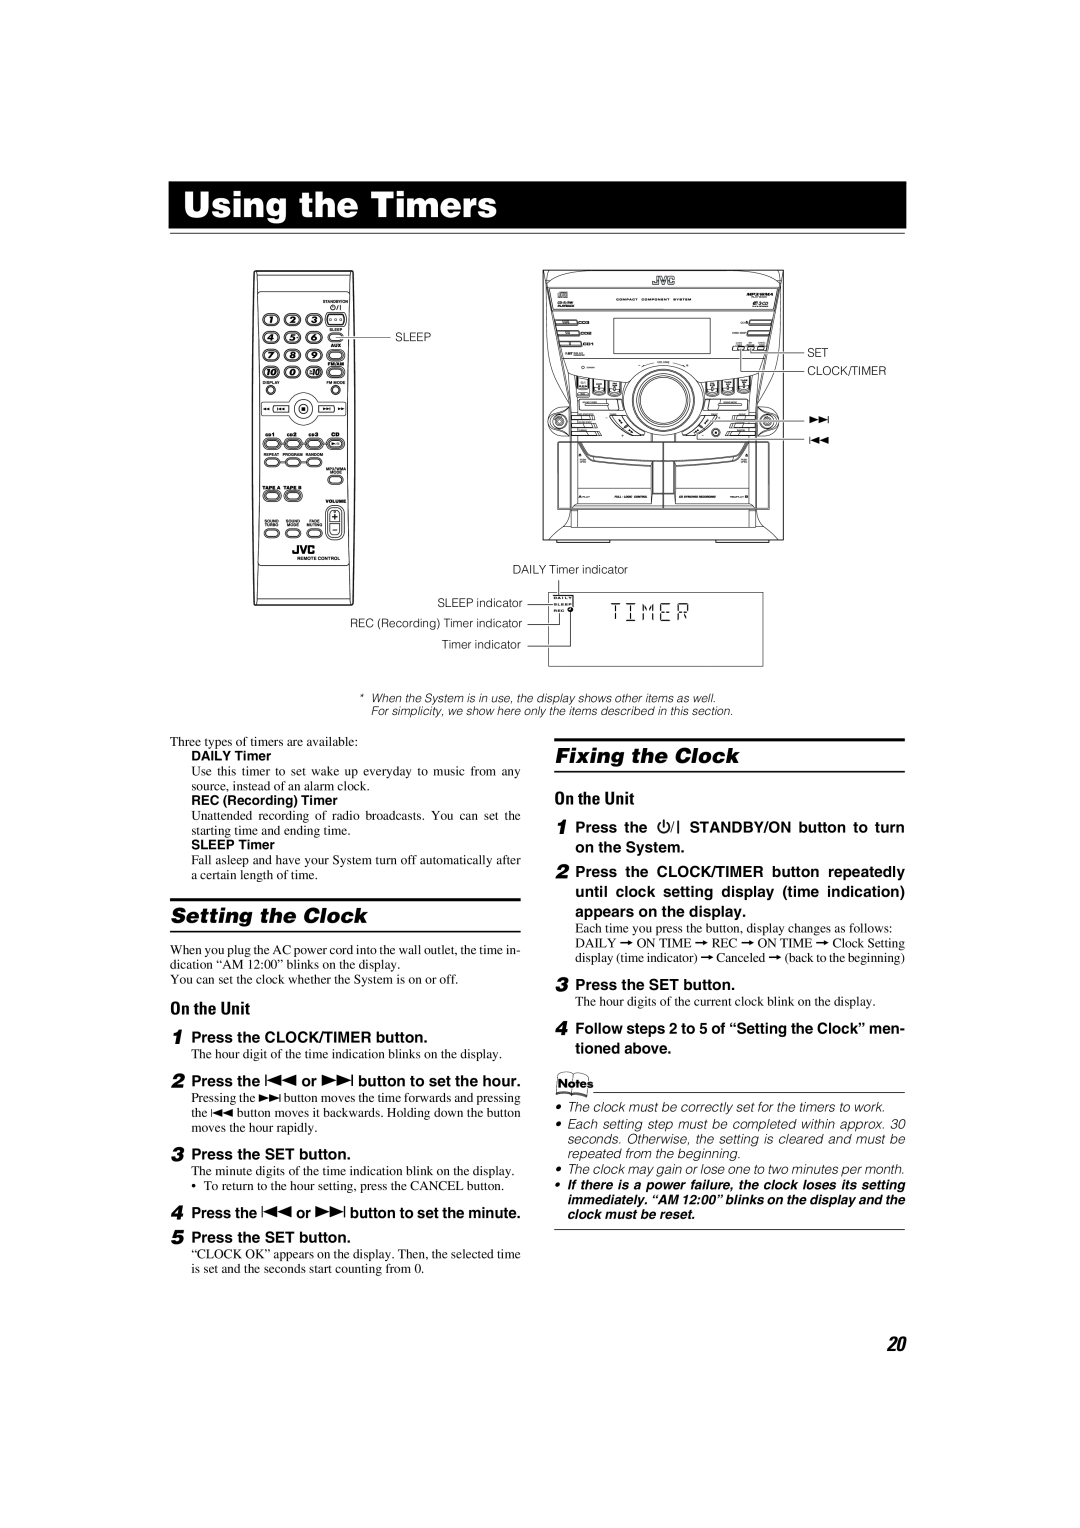 JVC MX-KC45 manual Using the Timers, Setting the Clock, Fixing the Clock, On the Unit, Press the CLOCK/TIMER button 